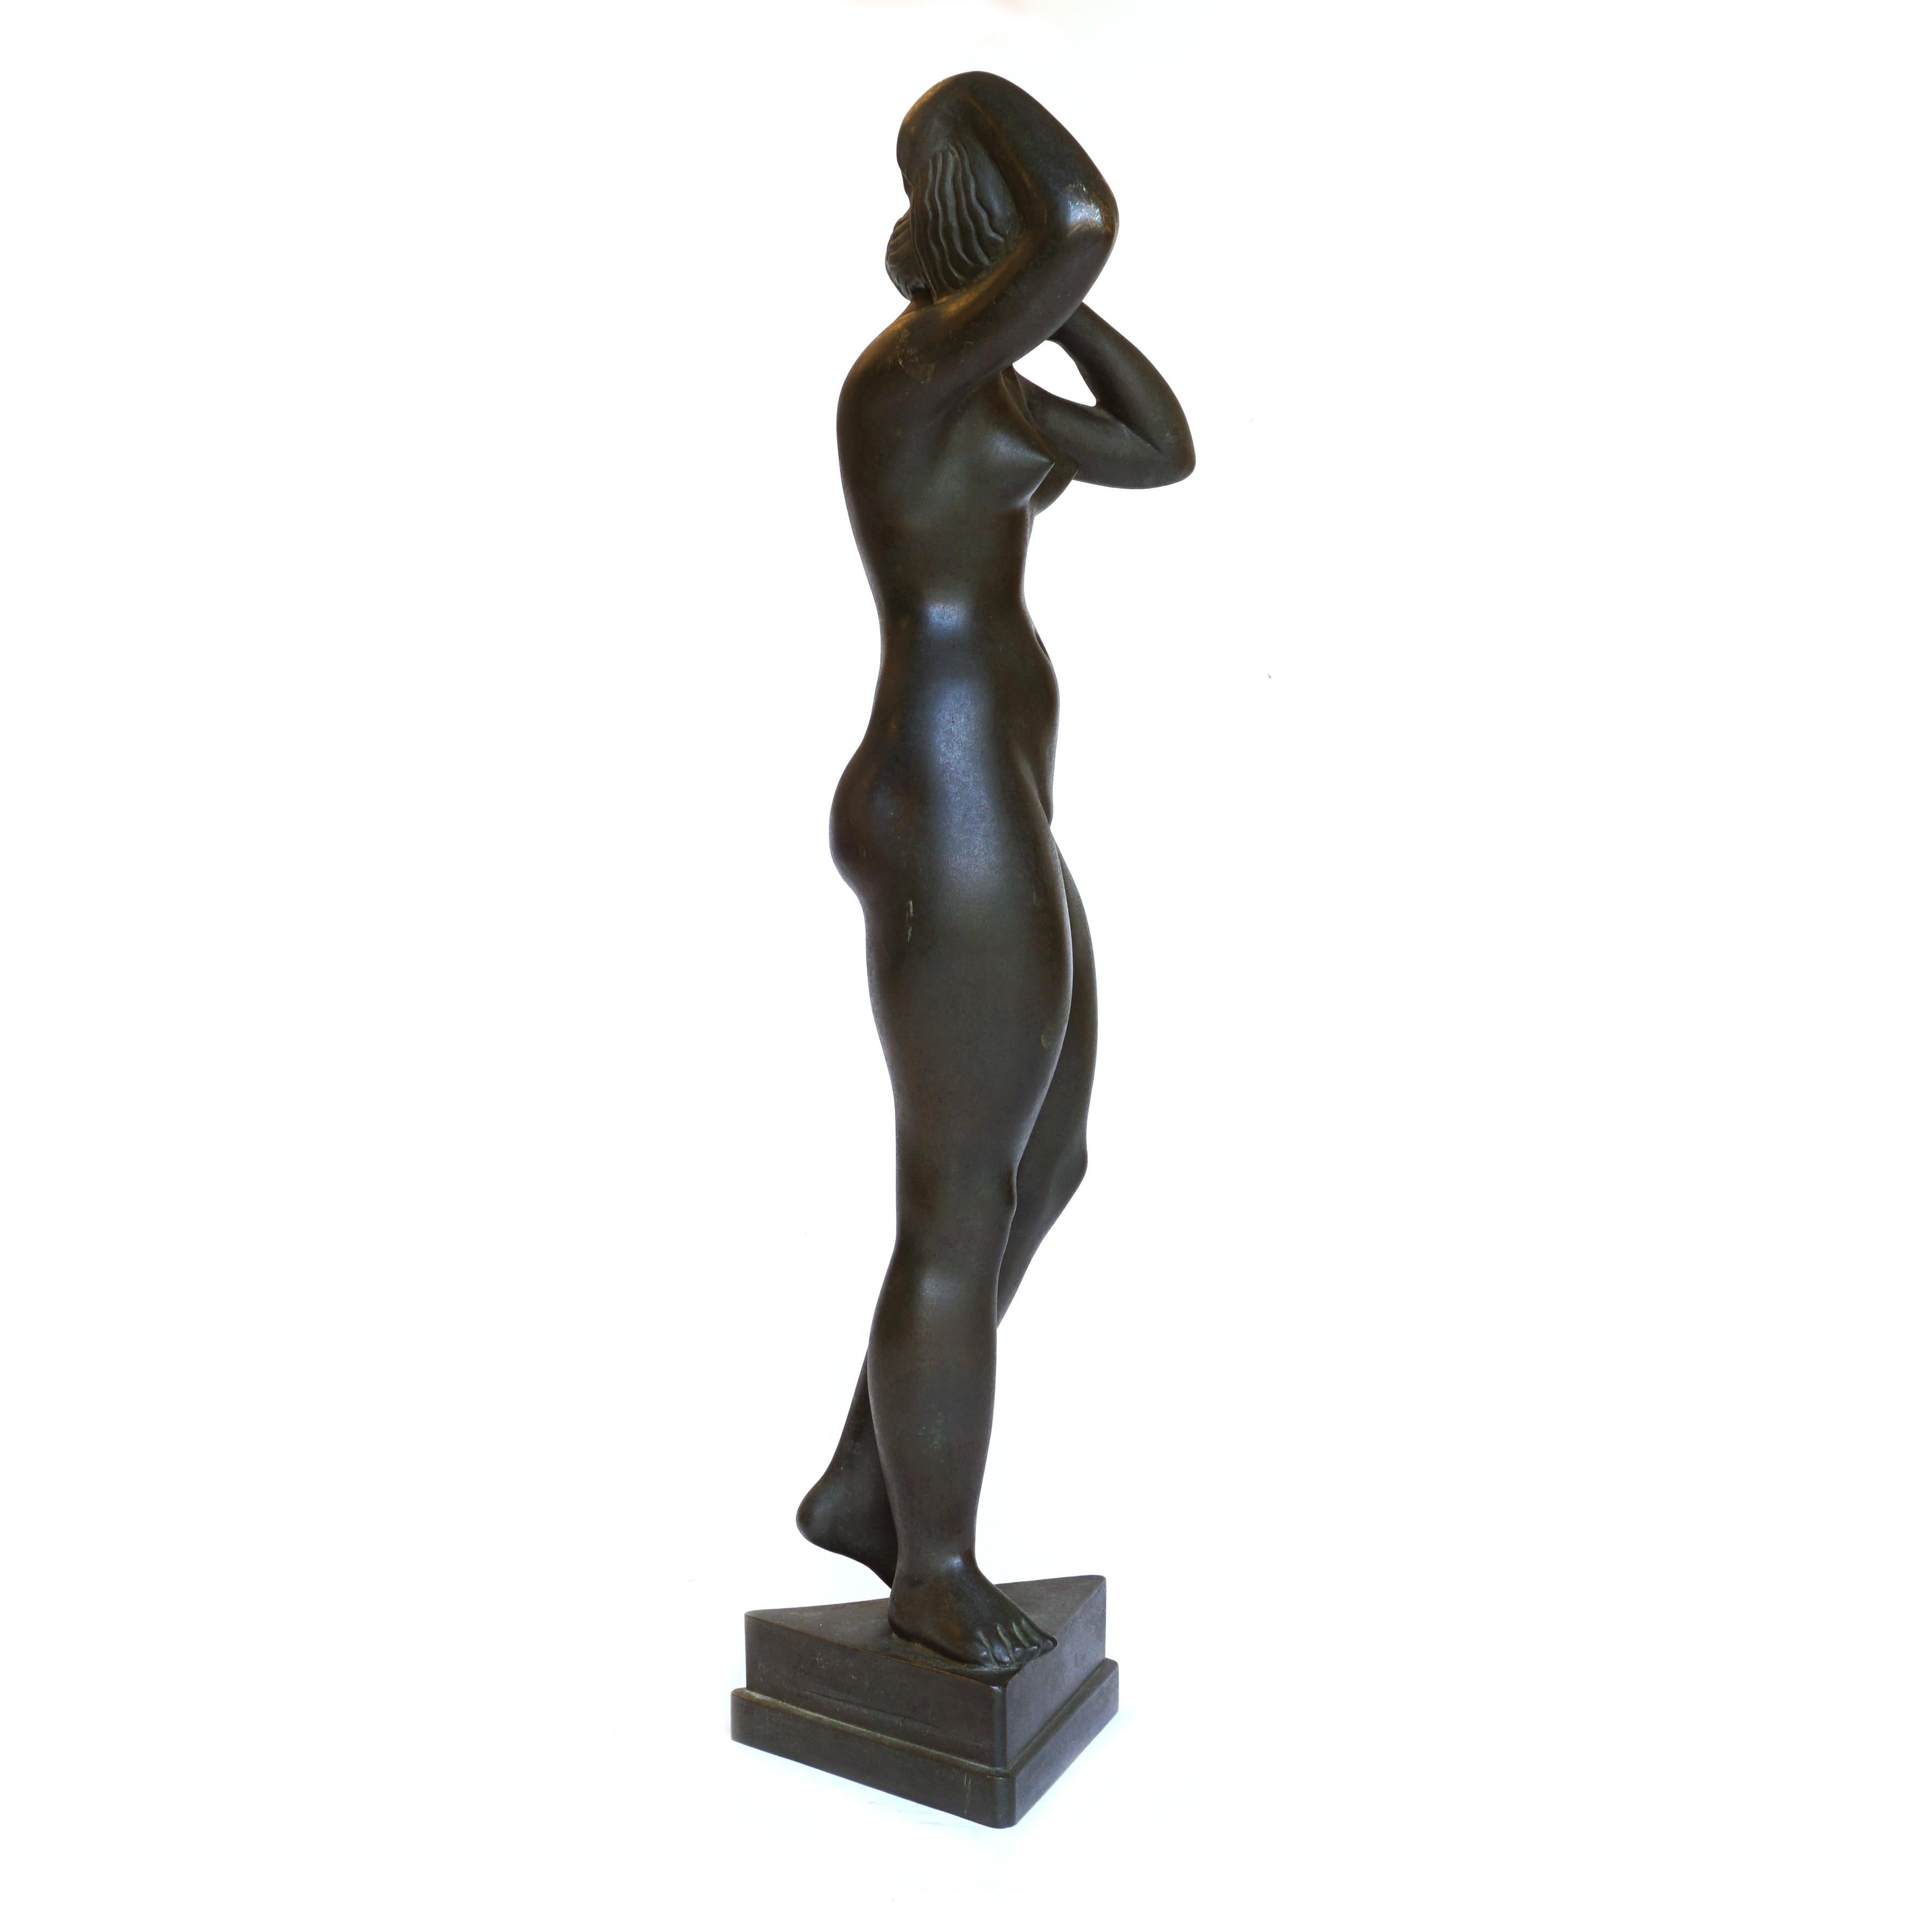 Johannes C. Bjerg, 1886-1955, leading Danish modern sculptor
Standing woman bronze statuette designed 1916
The statuette is bought directly from the artist's descendants and has never been on the market before
Good condition. Small scratches.